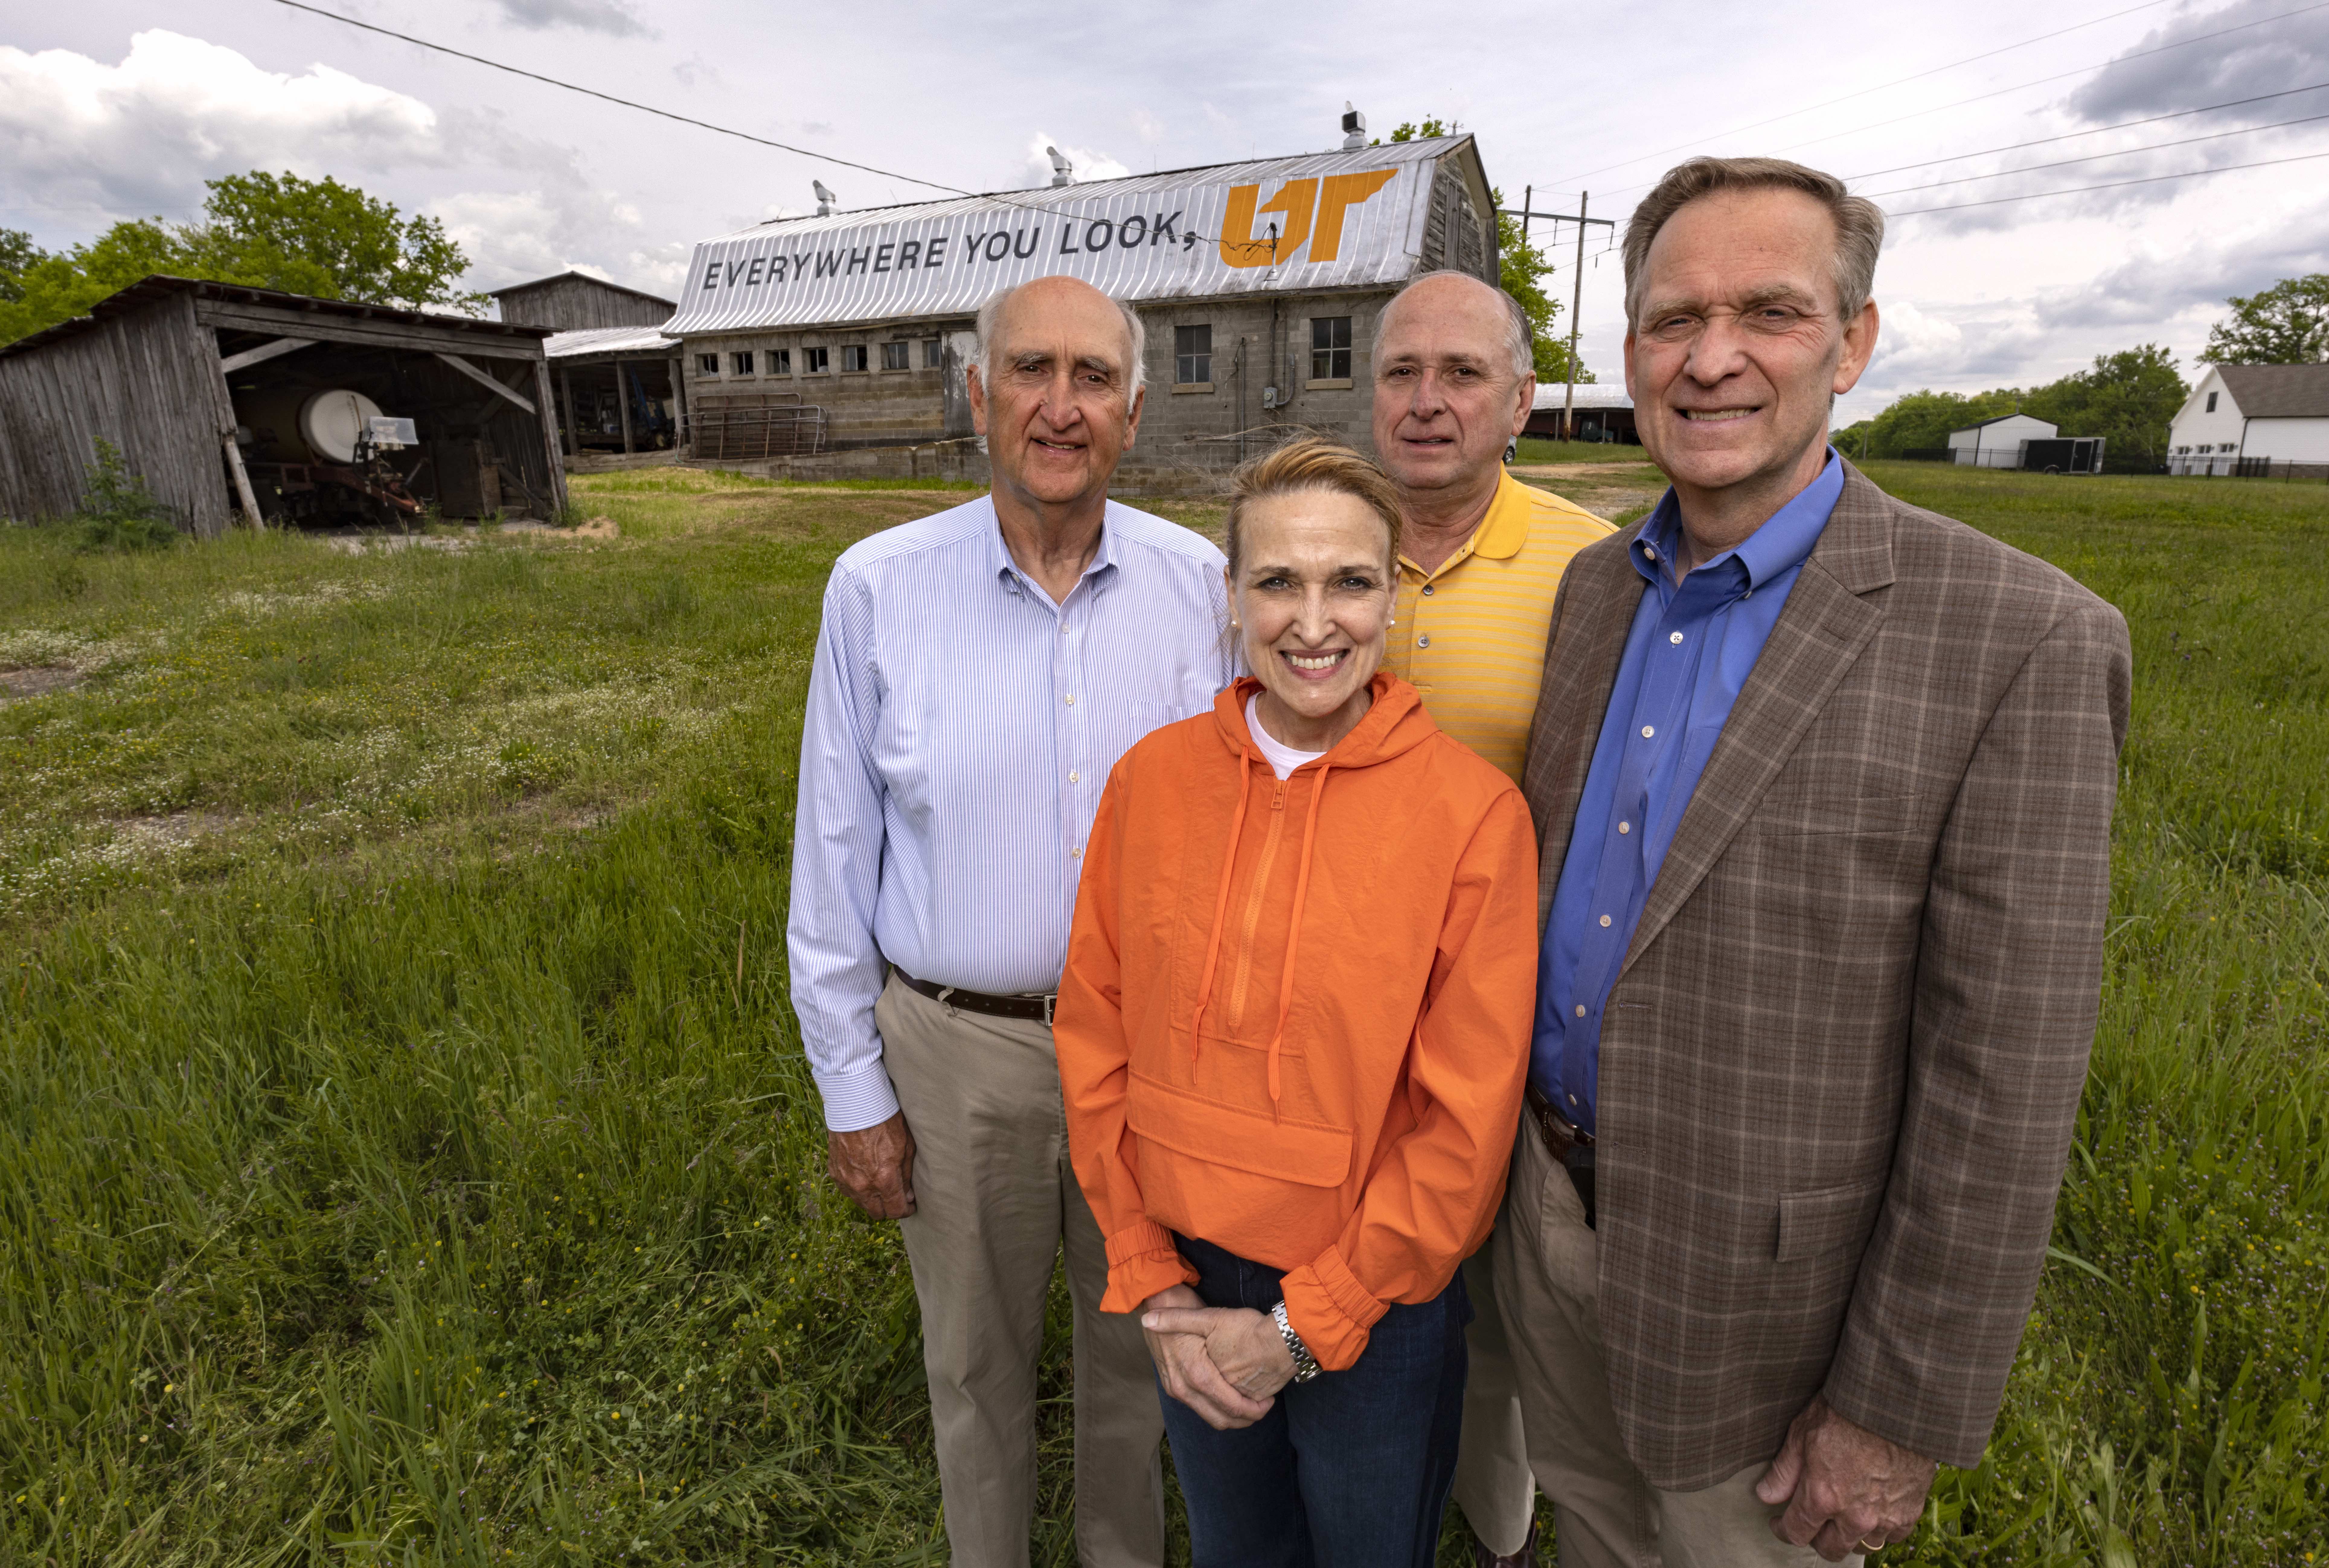 Harlan family members stand in front of UT mural in Columbia, Tennessee, located on Harlan Family Farm